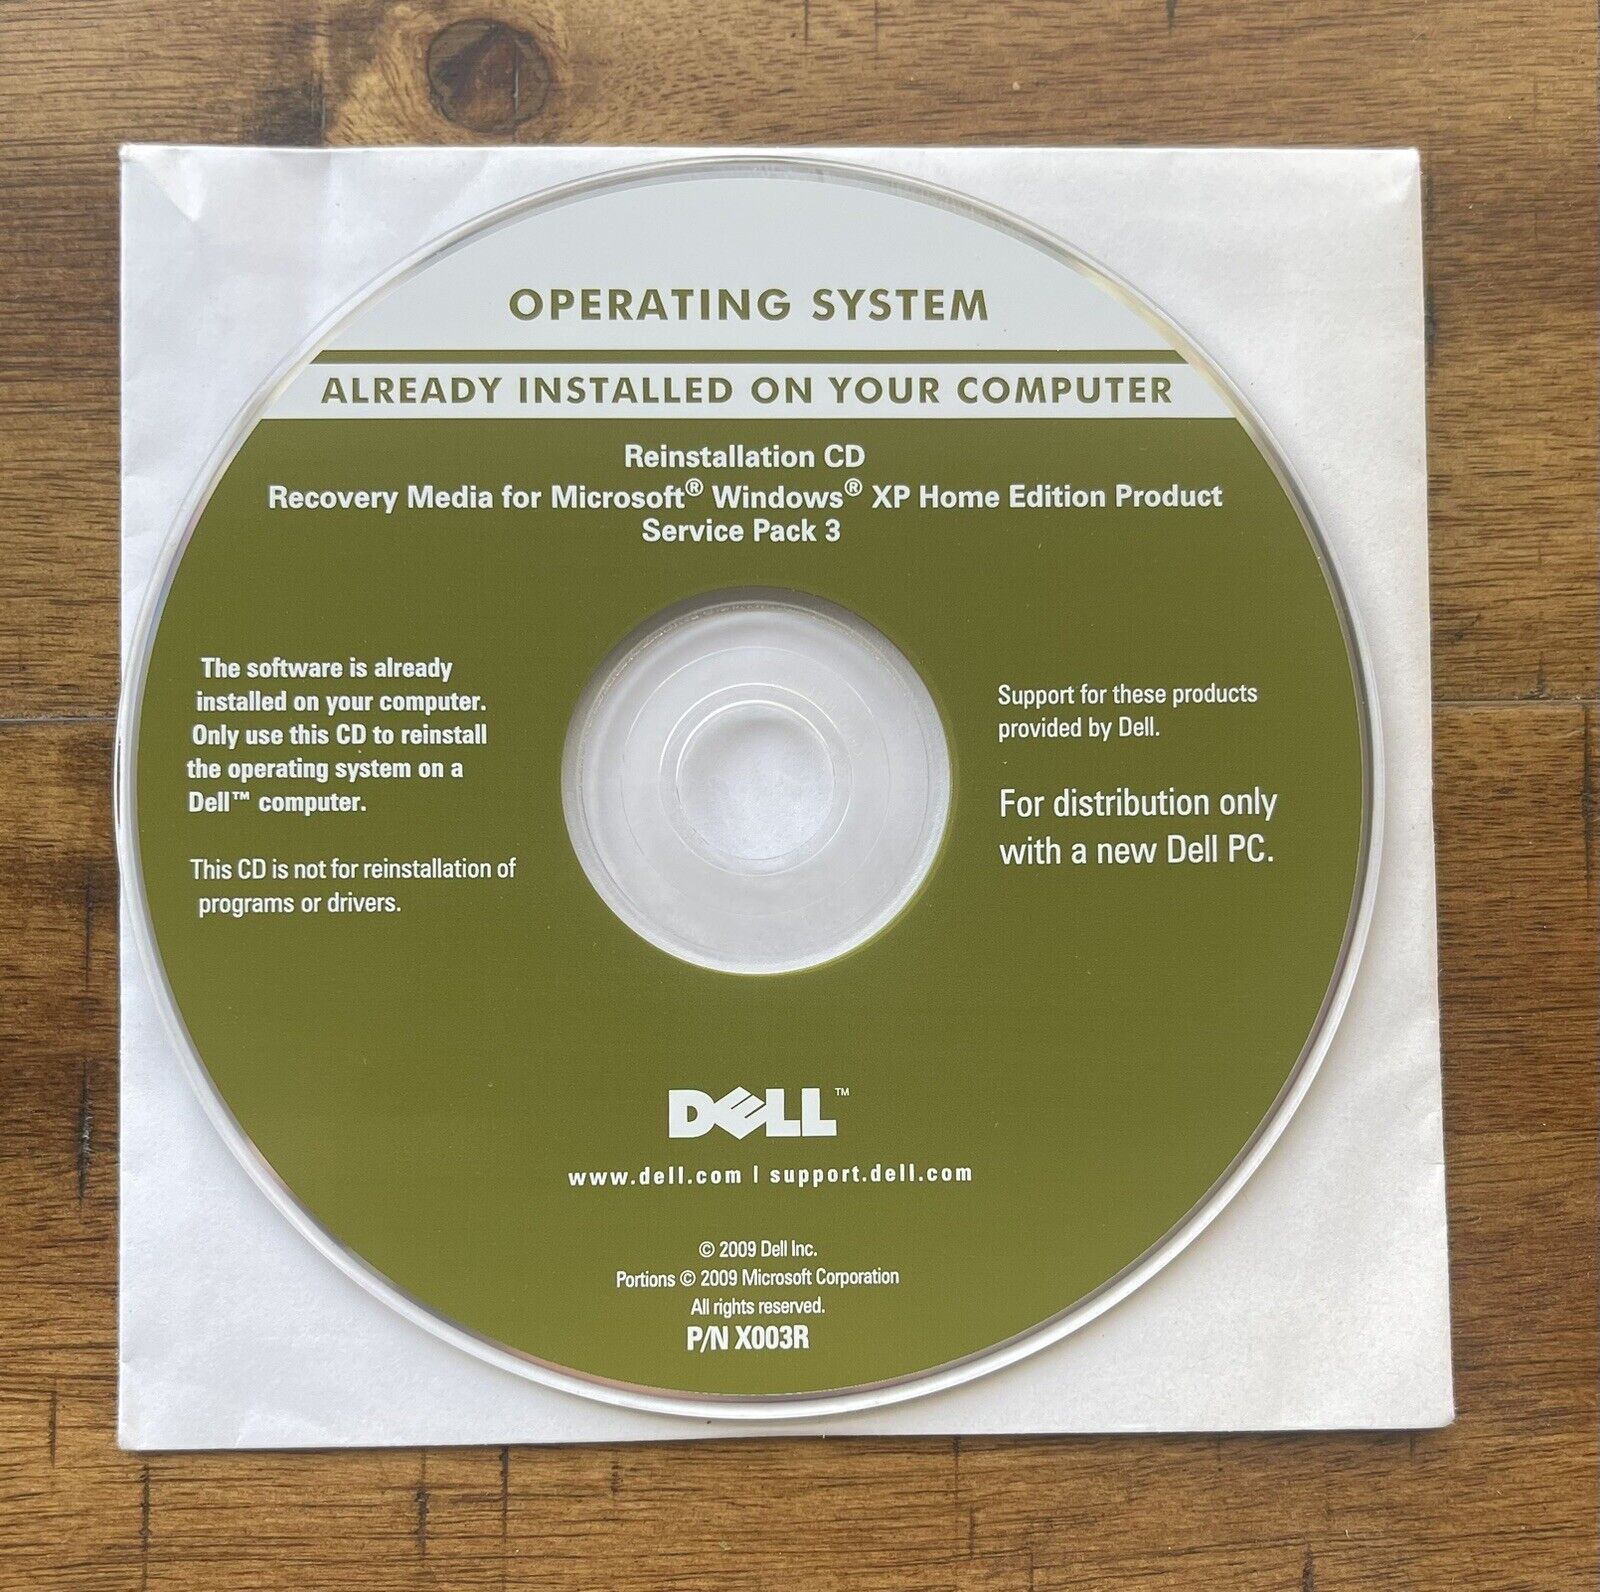 DELL RECOVERY MEDIA FOR MICROSOFT WINDOWS XP HOME EDITION SERVICE PACK 3